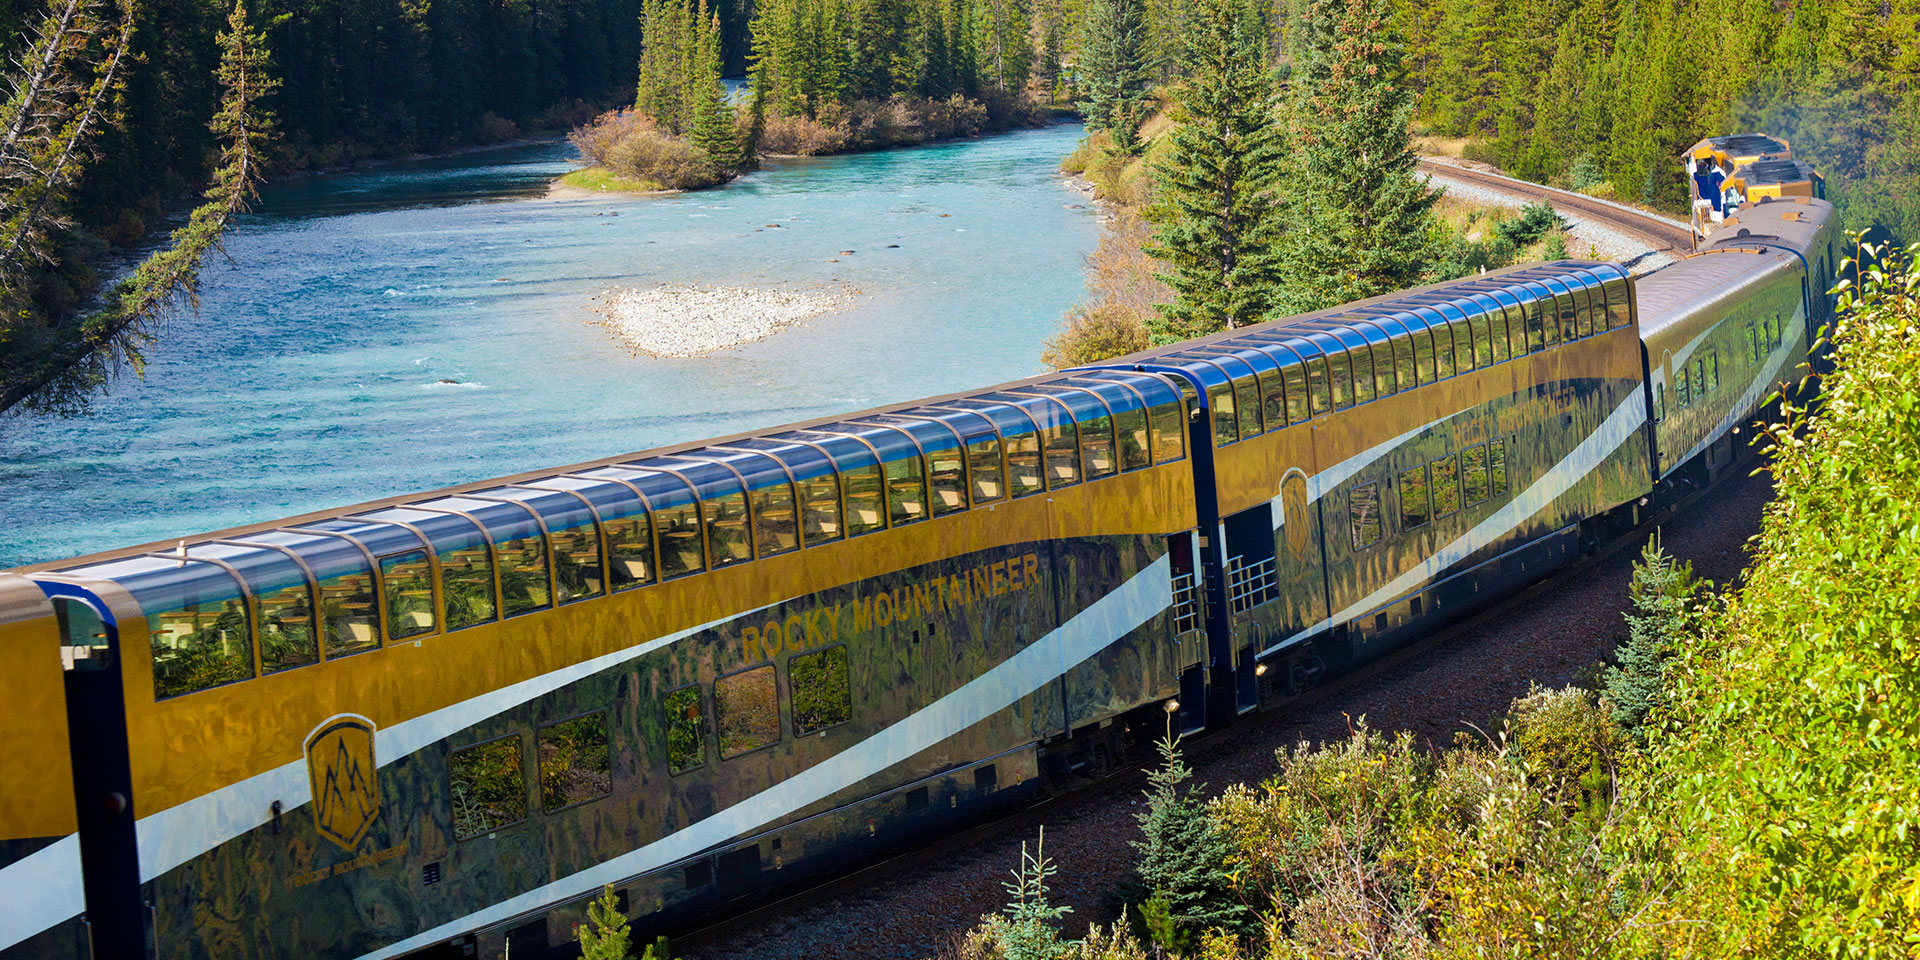 This Canadian train tops the lists of the most luxurious and the most Instagrammable